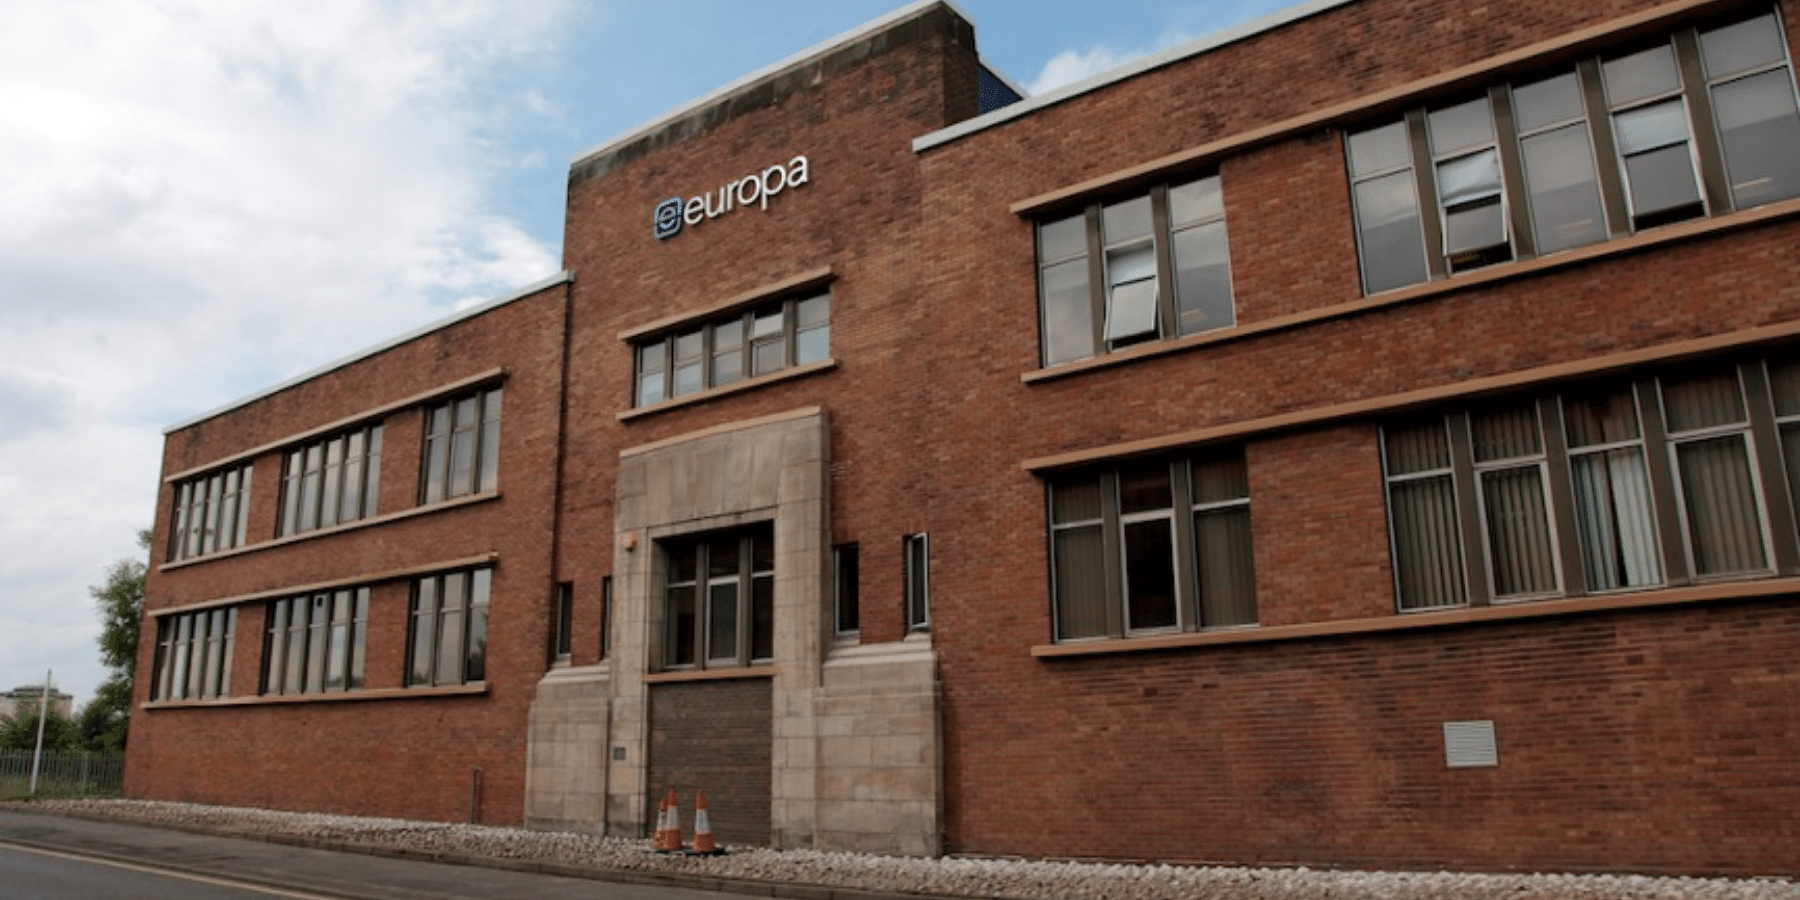 MCR Property Group acquires Europa House in Motherwell